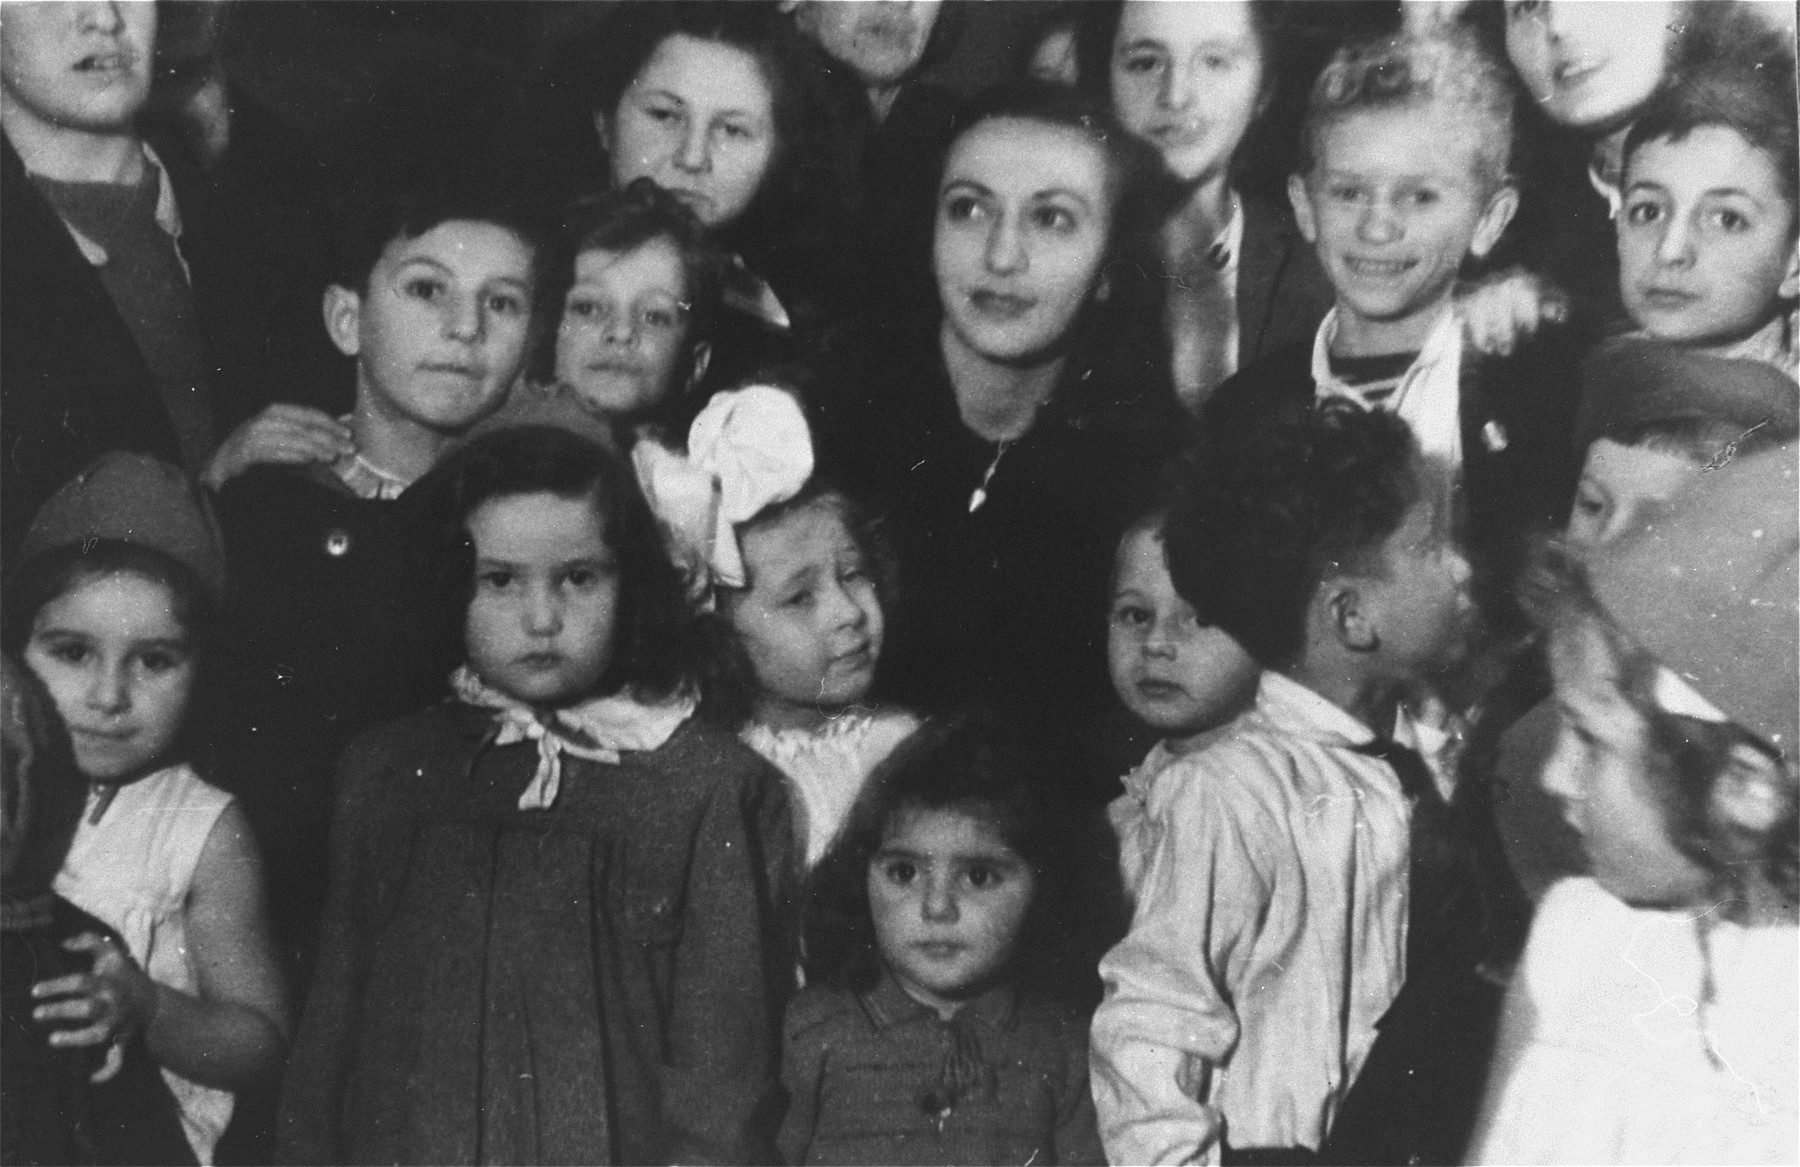 Children crowd together for a Hanukkah celebration in the Zeilsheim displaced persons' camp.

Those pictured include Szlomo Waks (second from right, second row from top), Bluma Berk (bottom left), and Shalom Lewin (front row, second from right).